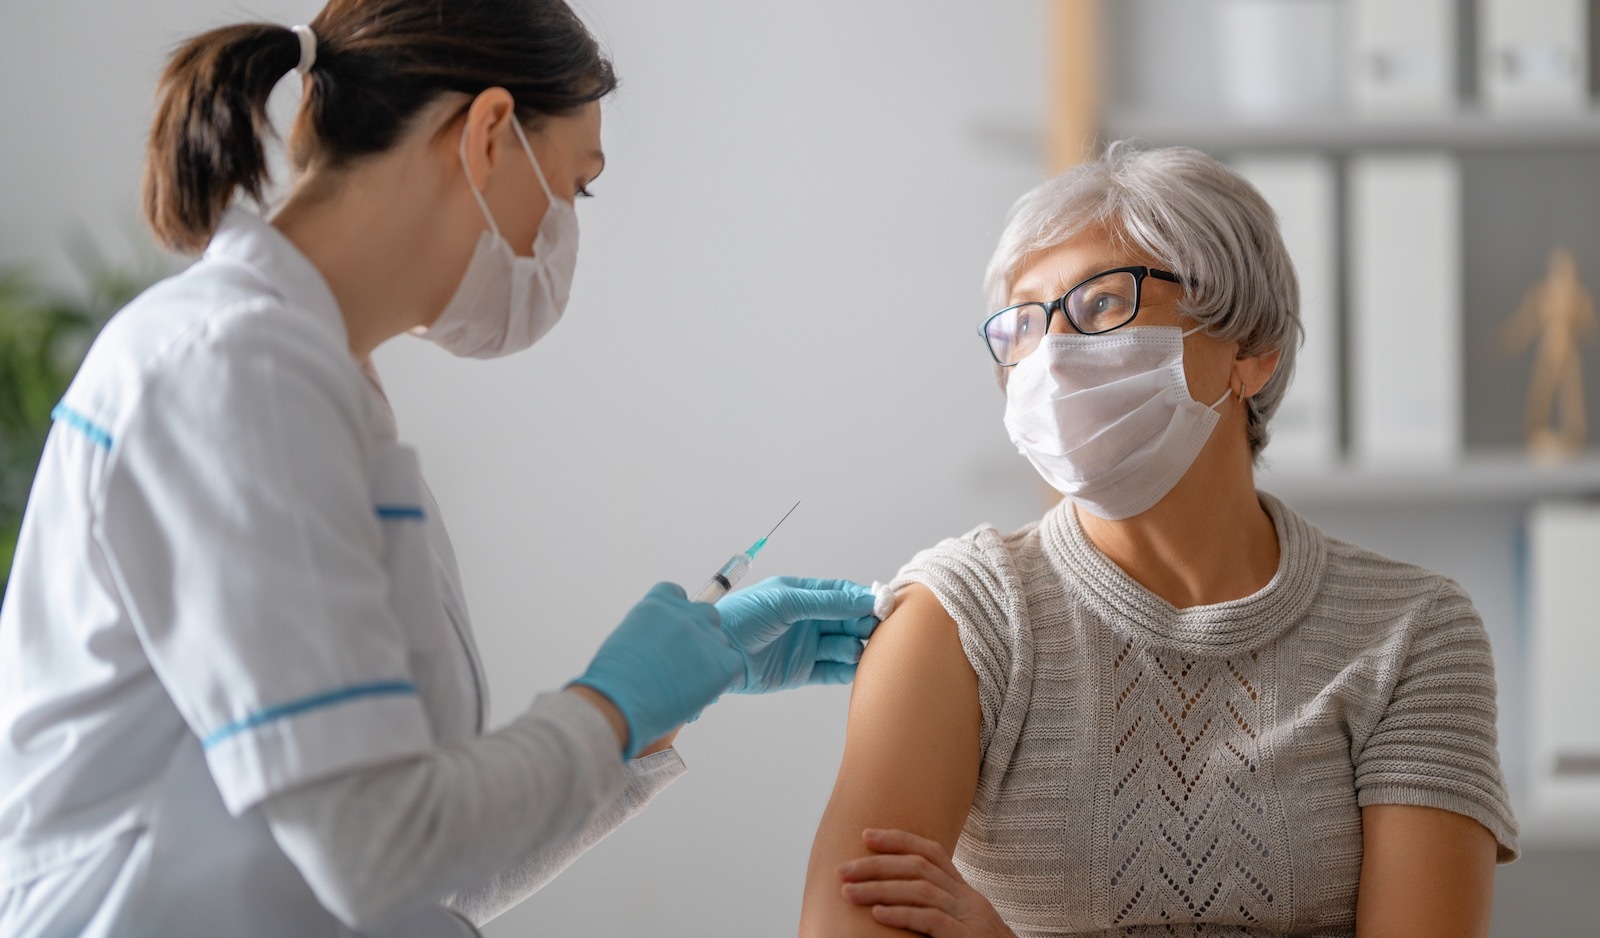 Nurse vaccinating elderly woman with covid-19 vaccine wearings masks